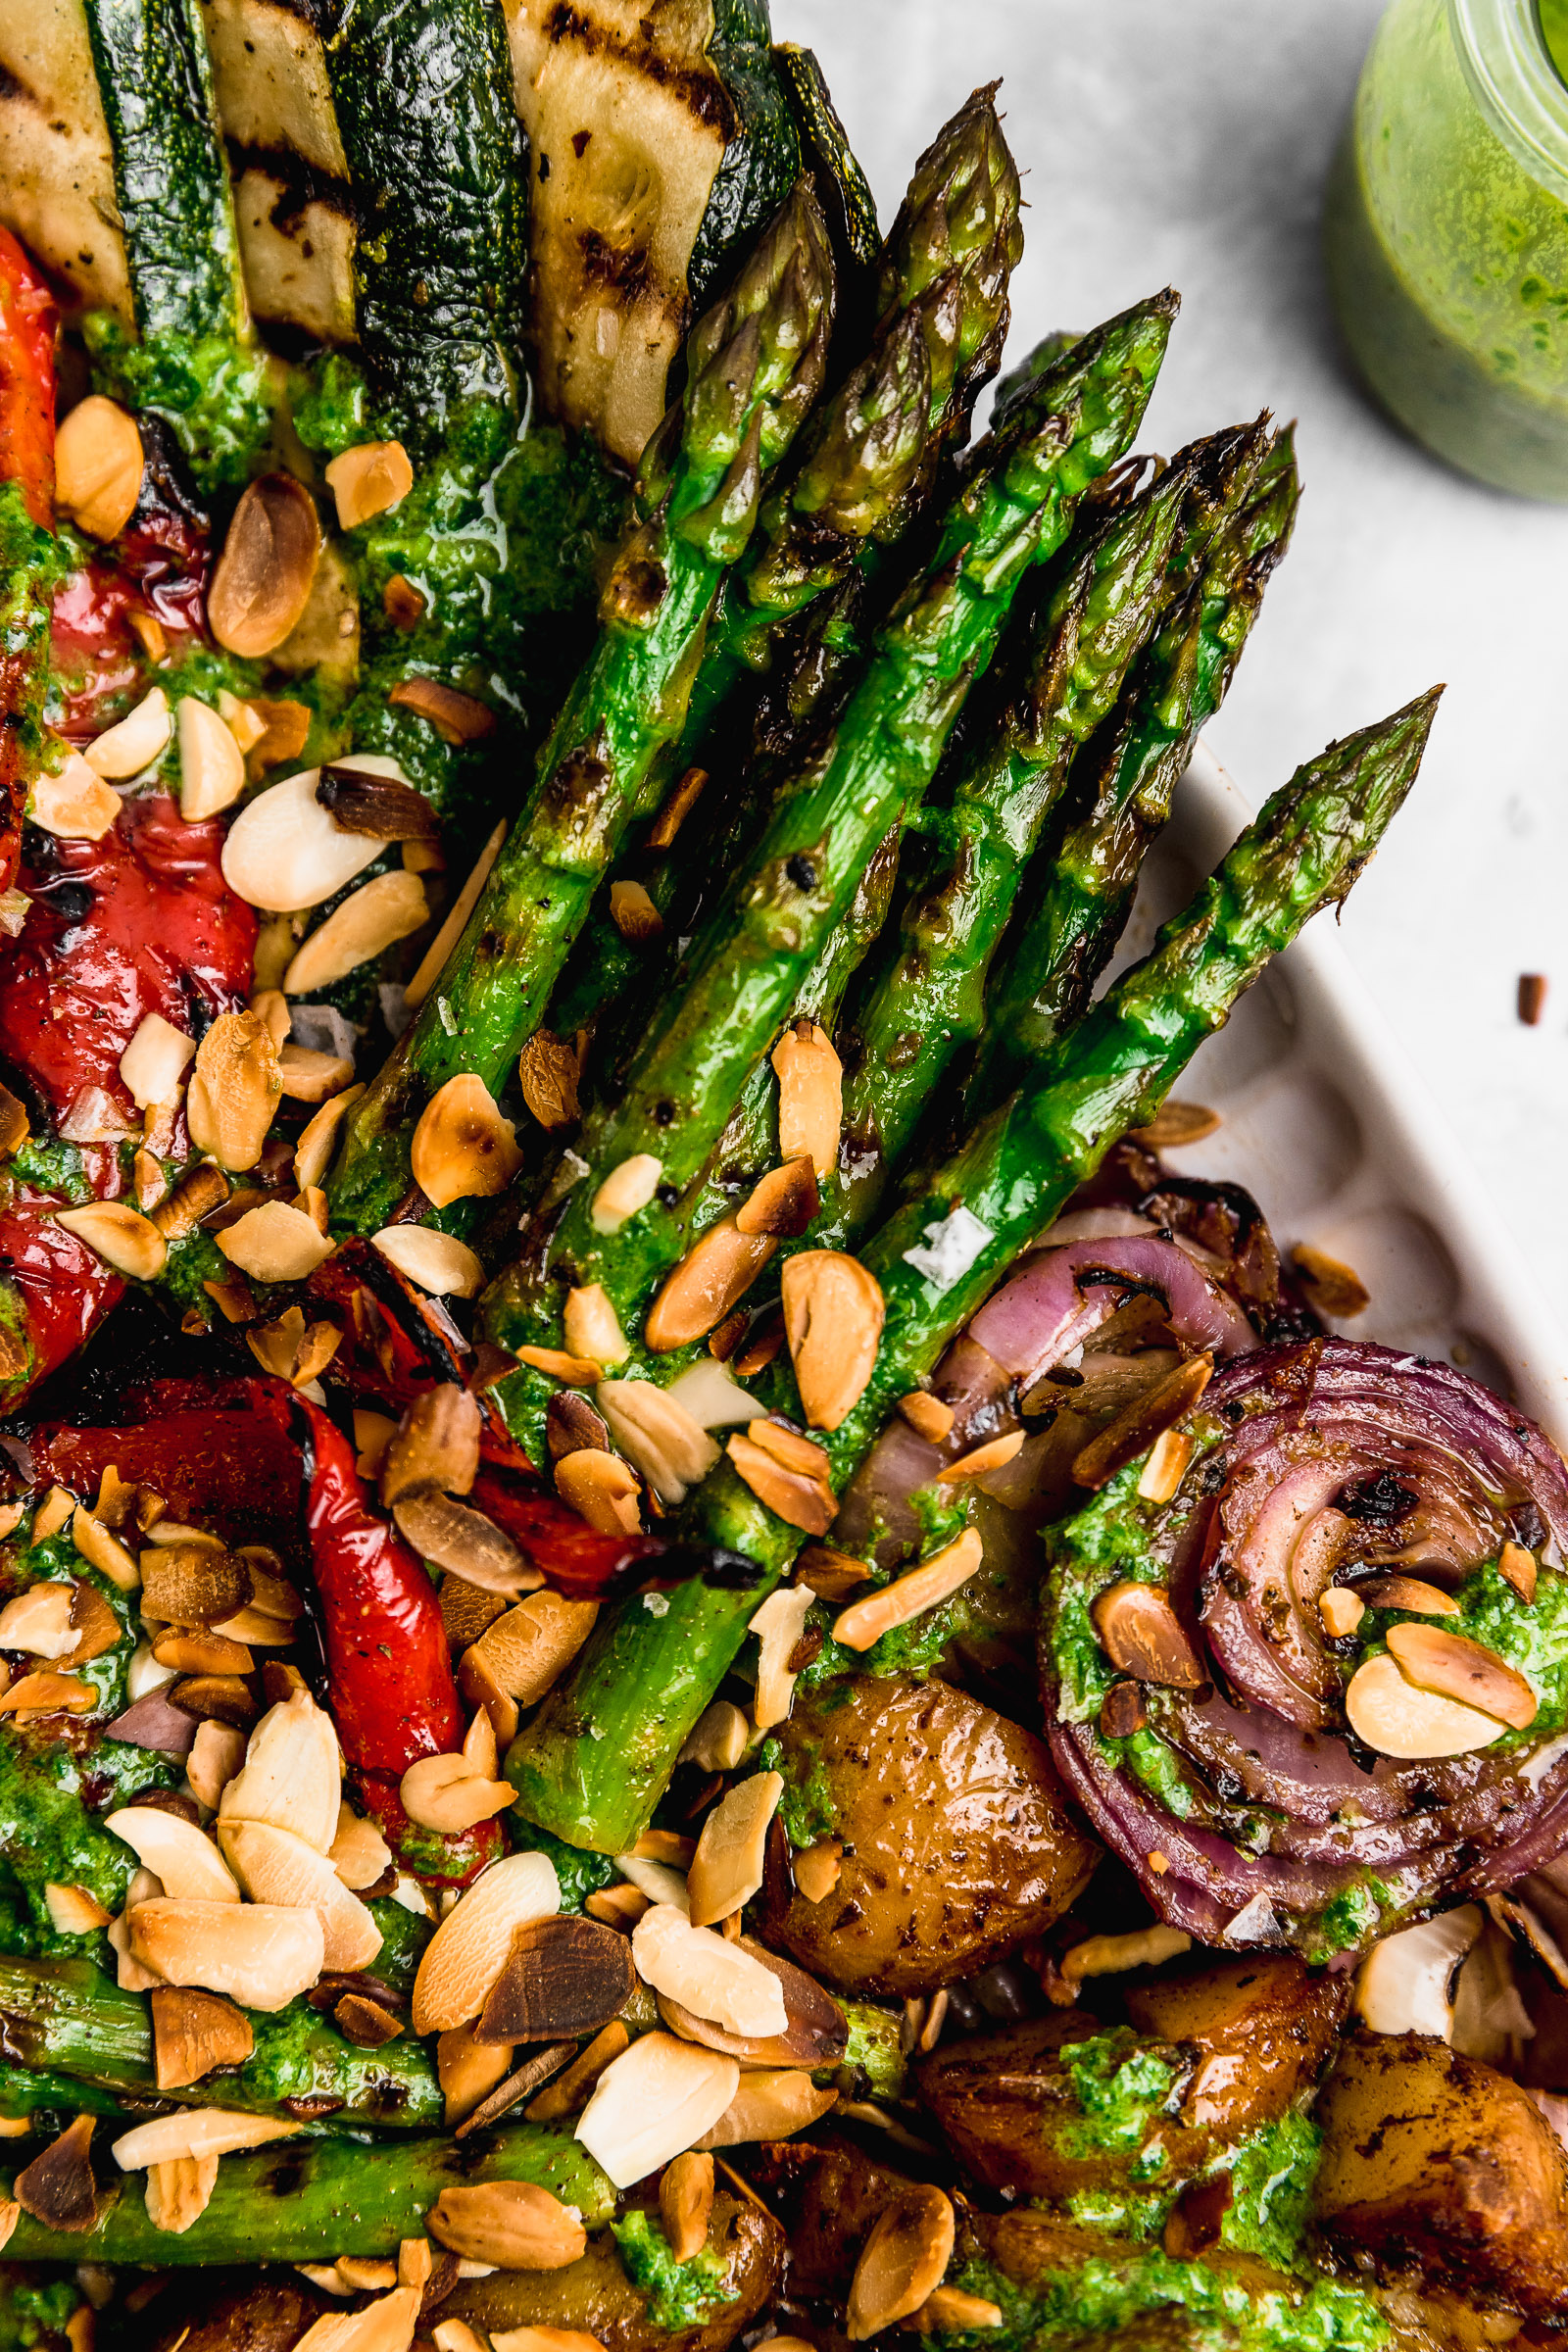 Zoom into a large platter of marinated grilled vegetables and you can see the details on the asparagus and onions, topped with a basil vinaigrette.